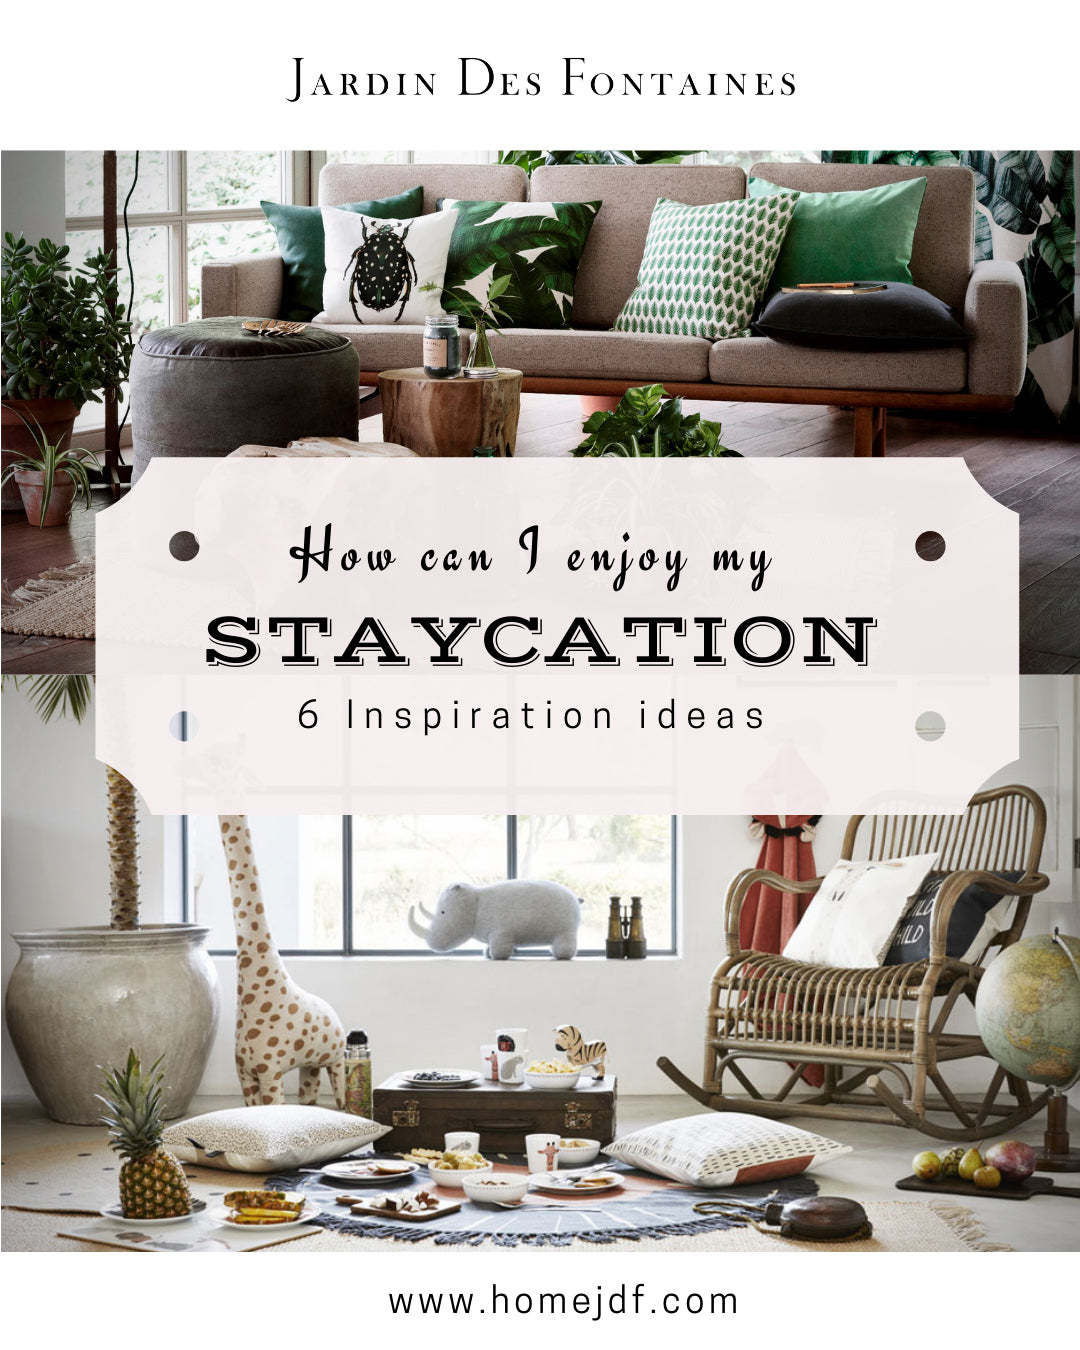 6 Inspiration Ideas for your staycation